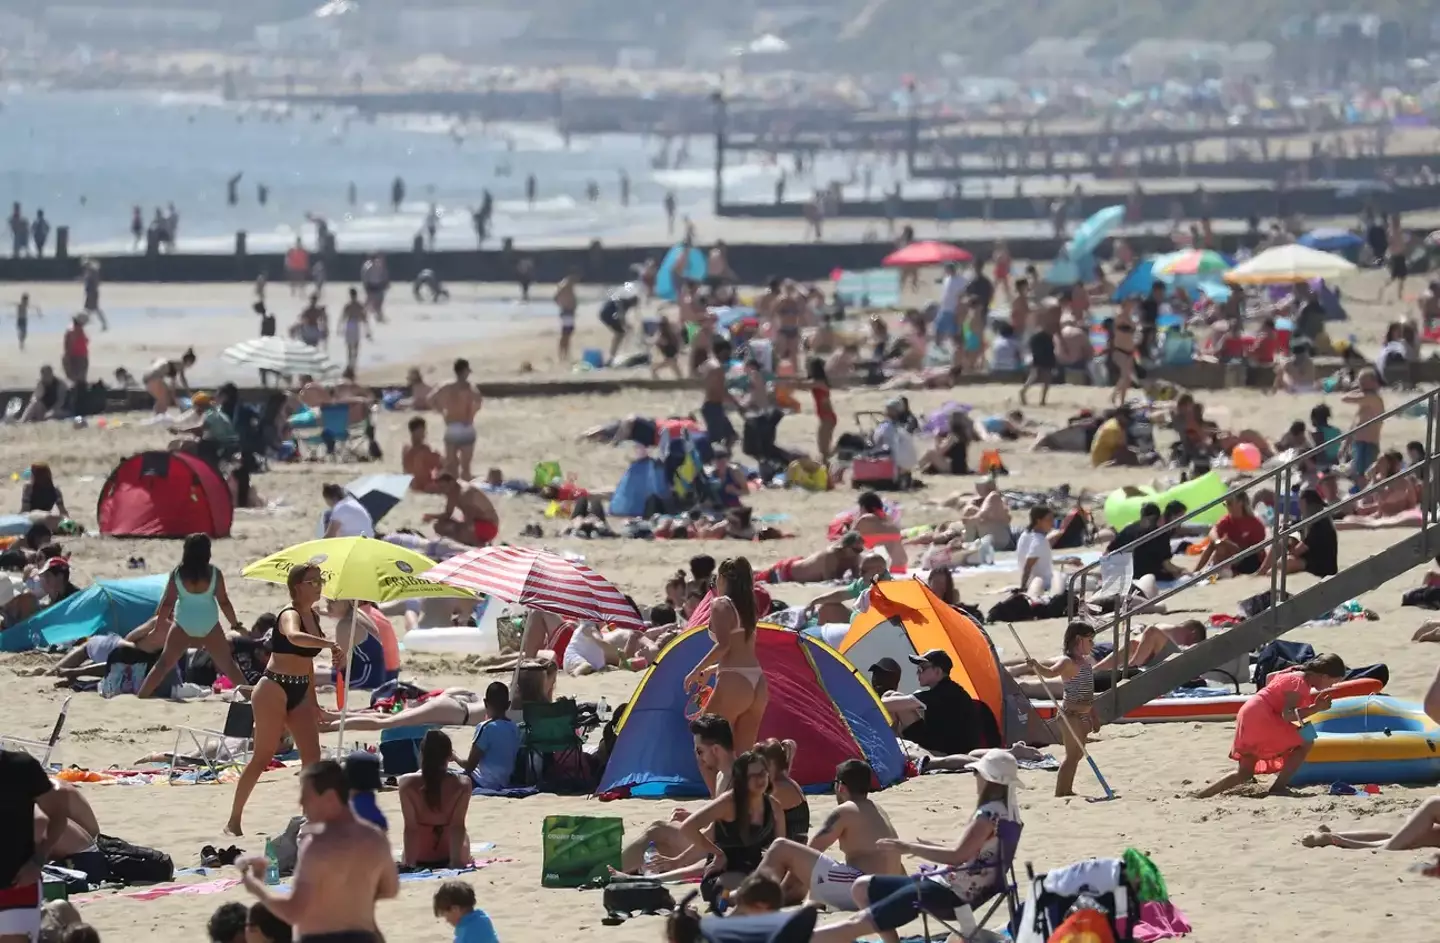 Brits will most likely flock to nearby beaches to catch the glorious rays.